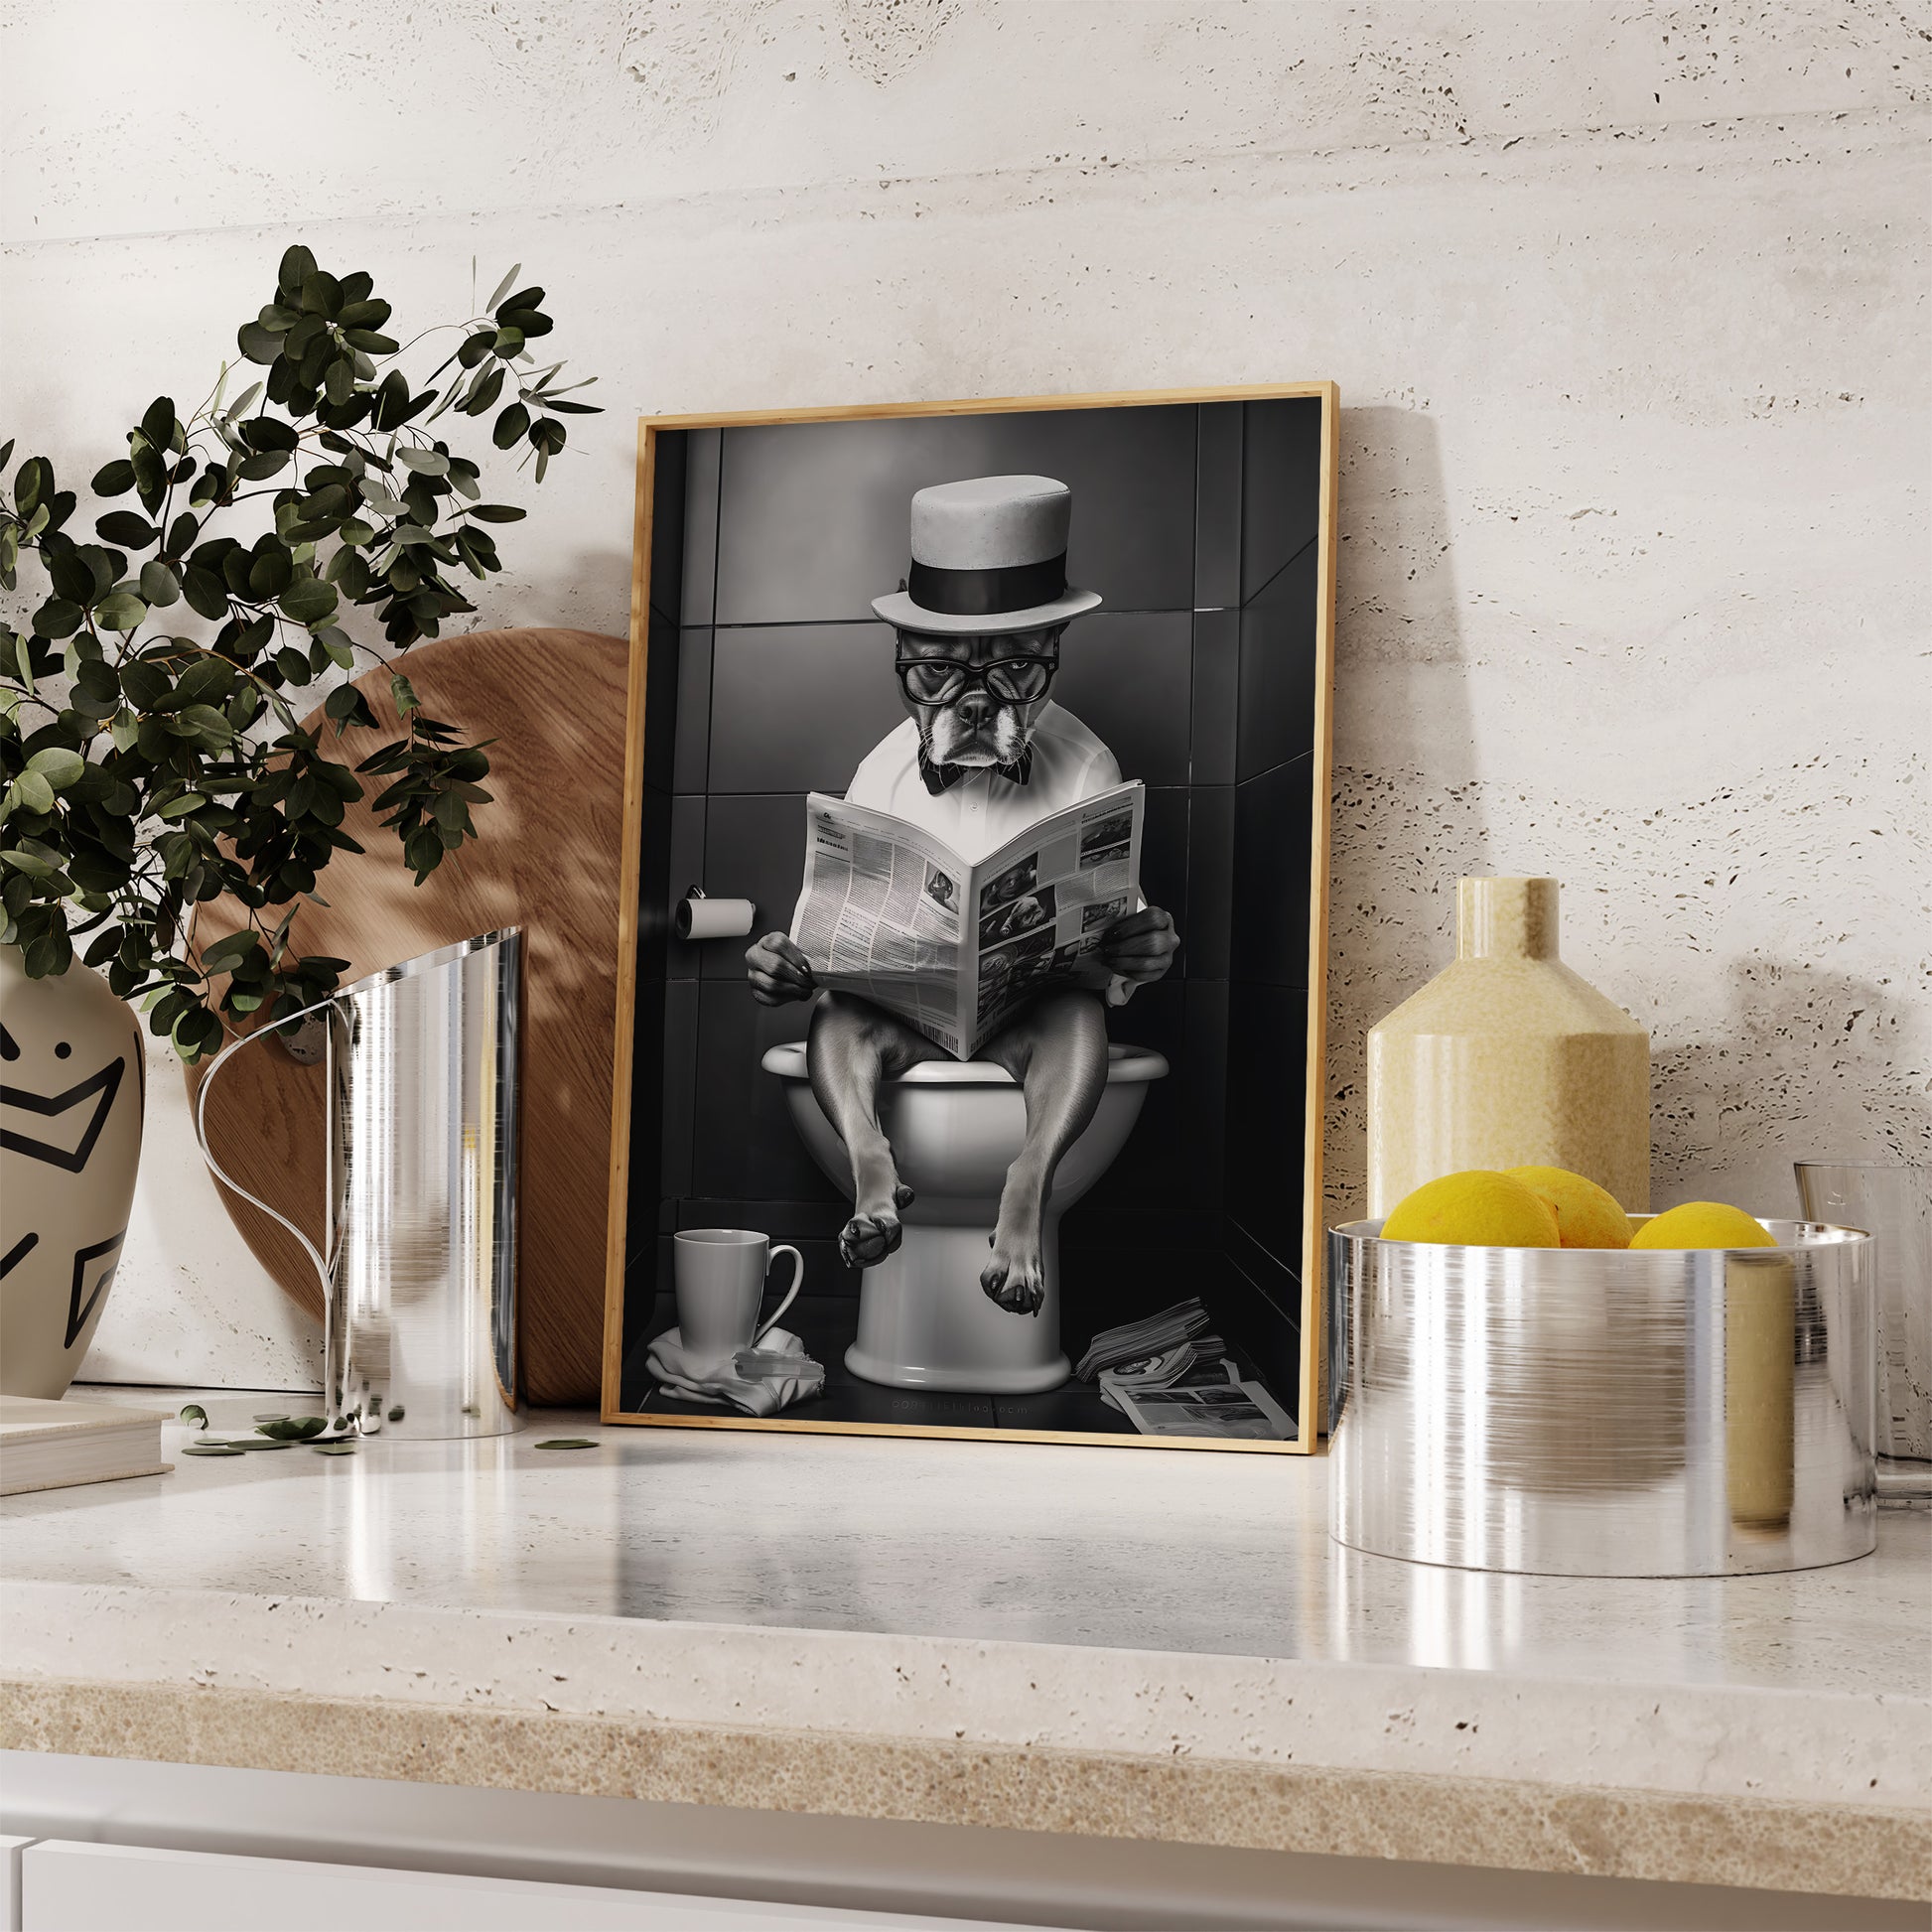 A framed black and white picture of a seated monkey reading a newspaper, displayed on a kitchen counter.